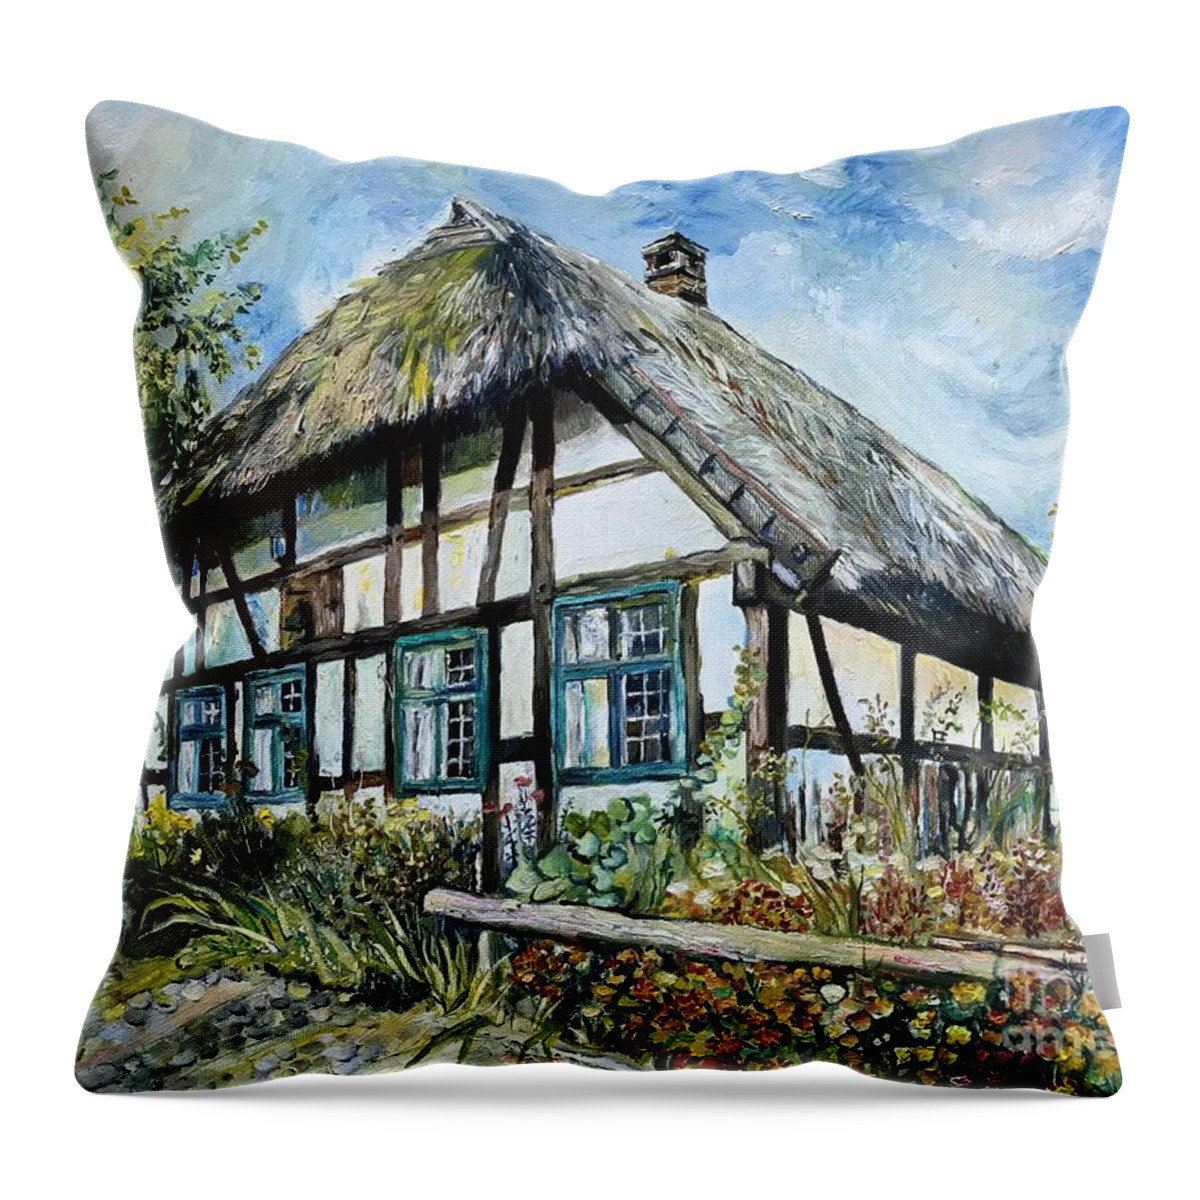 Home Sweet Home Throw Pillow featuring the painting Home Sweet Home by Suzann Sines